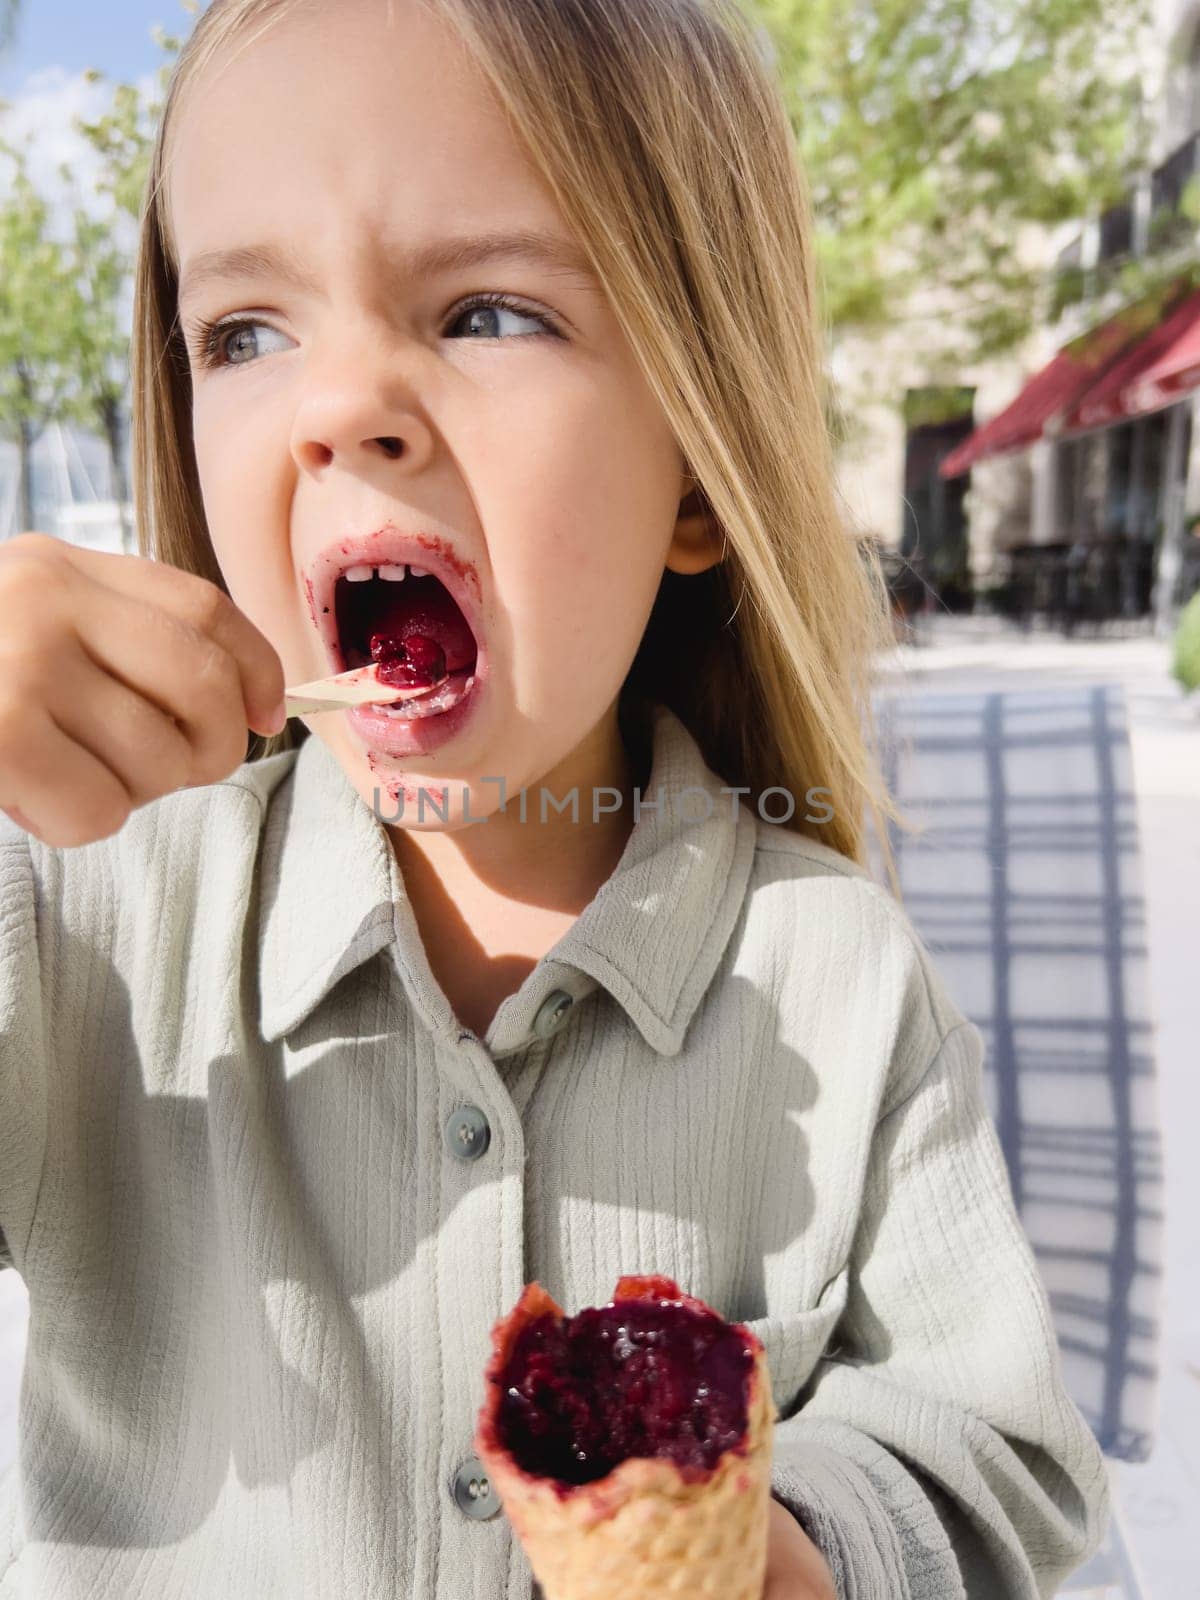 Little girl with stained mouth eating popsicles with a spoon. High quality photo